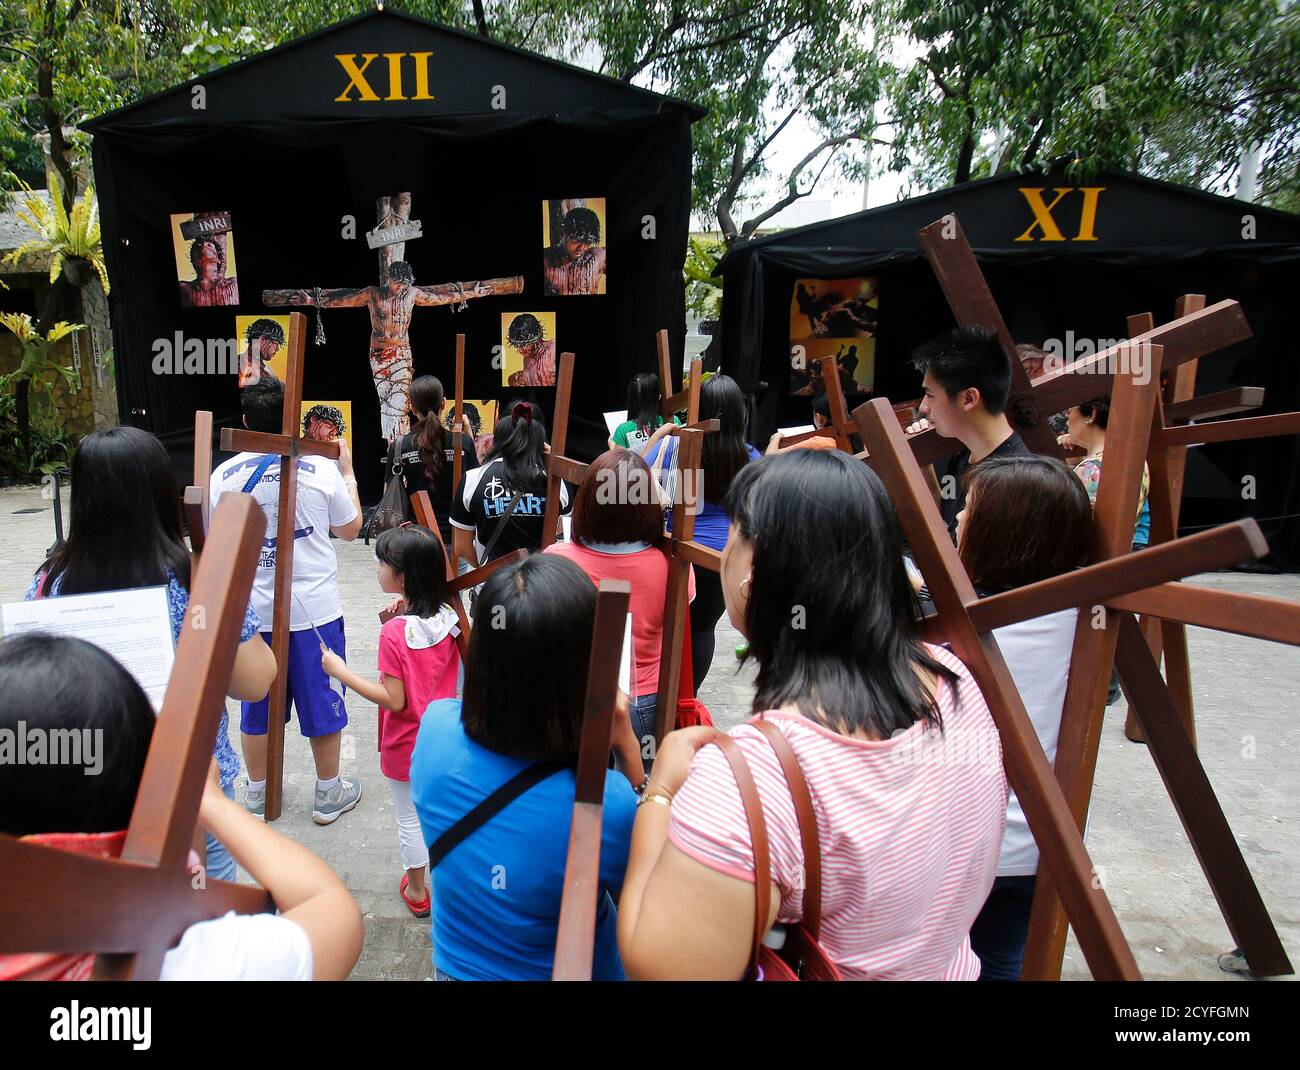 Catholic devotees carry crosses to one of the Stations of the Cross